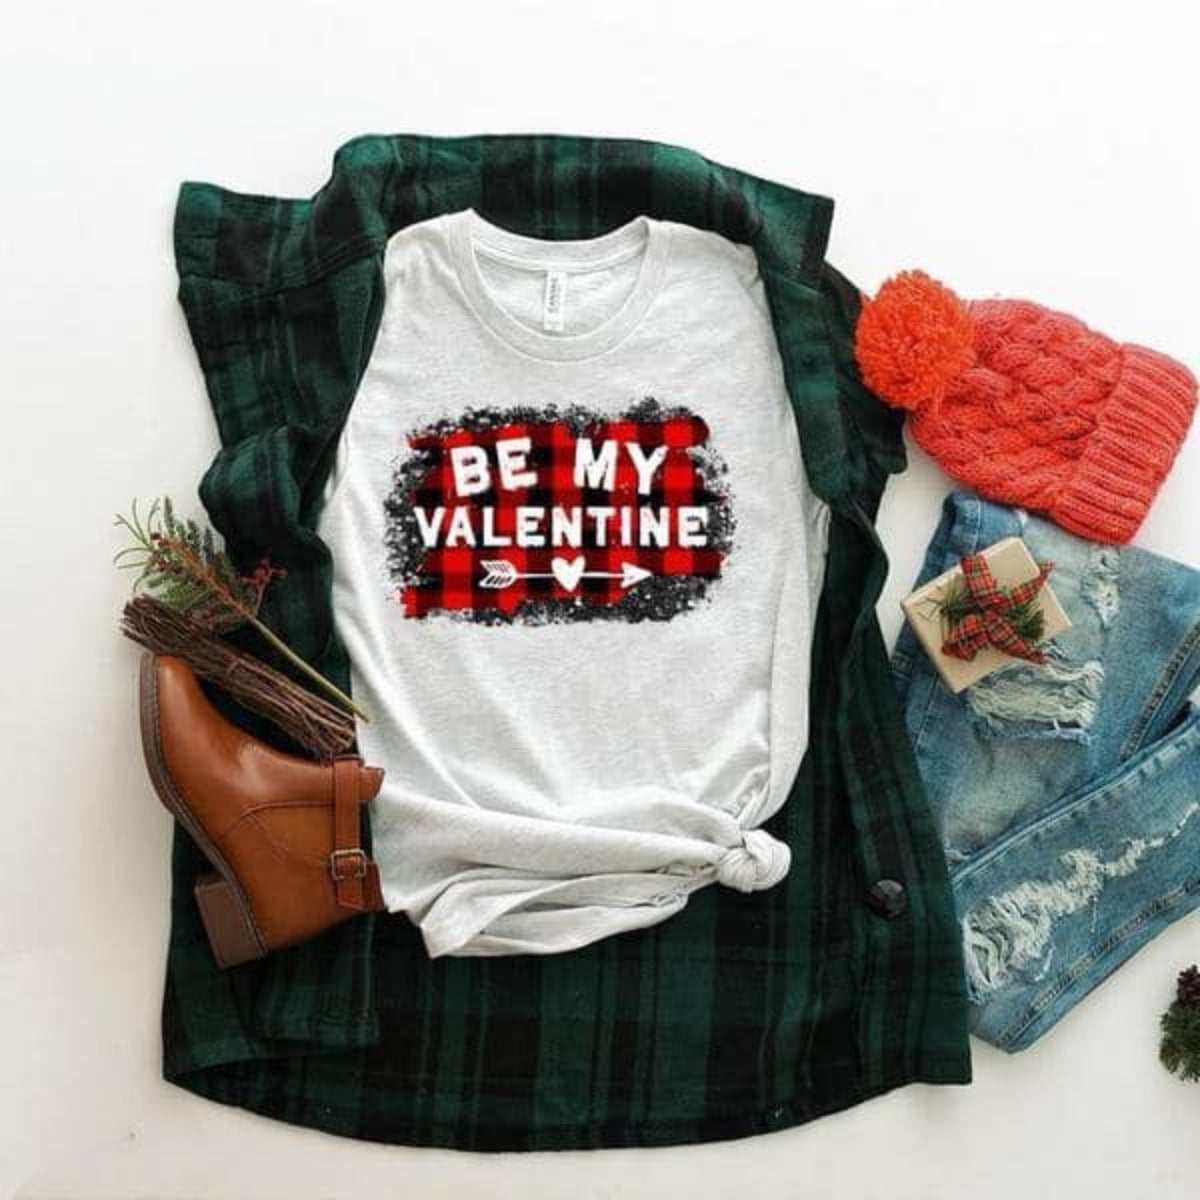 PREORDER - Be My Valentine Buffalo Plaid Boutique Soft Tee